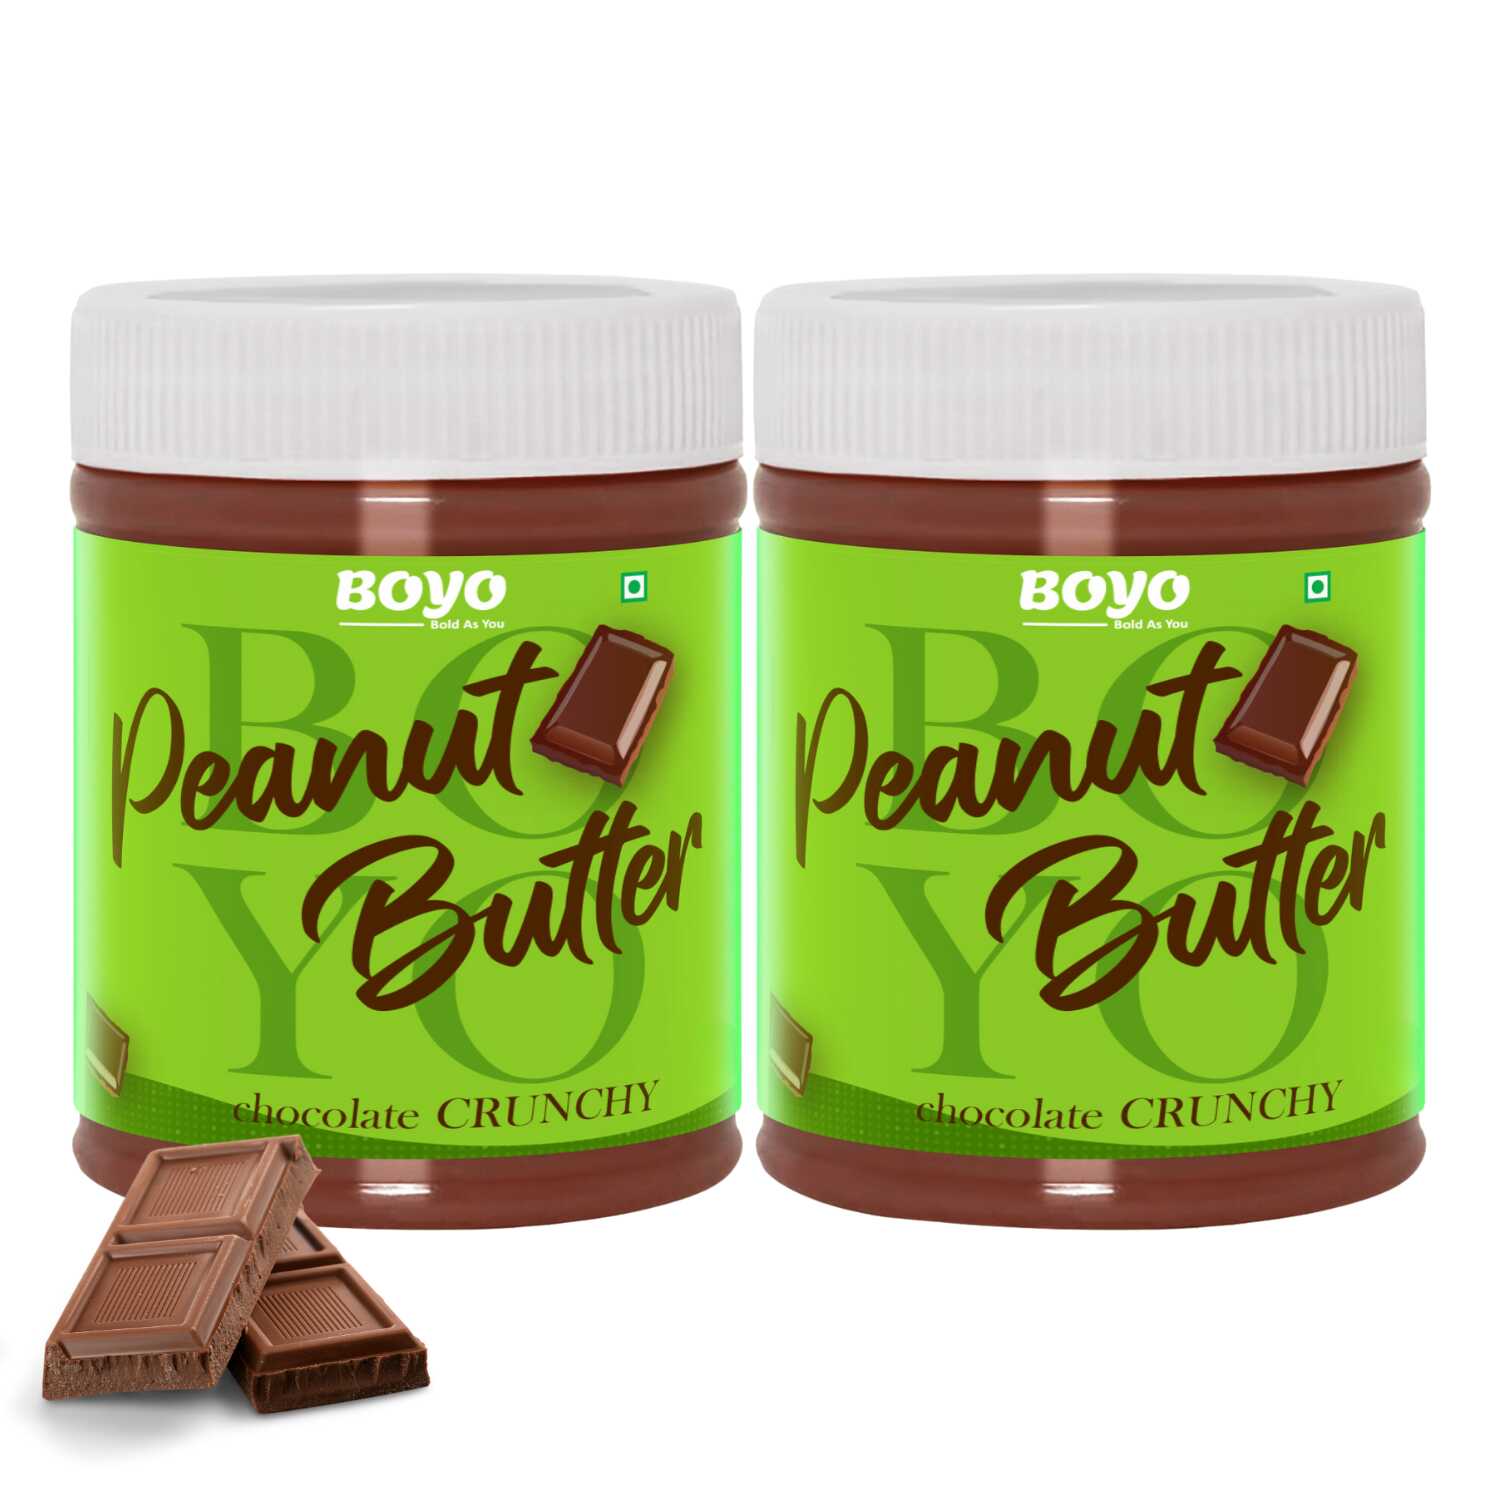 Peanut Butter Combo Chocolate Crunchy 510g Each - Pack of 2